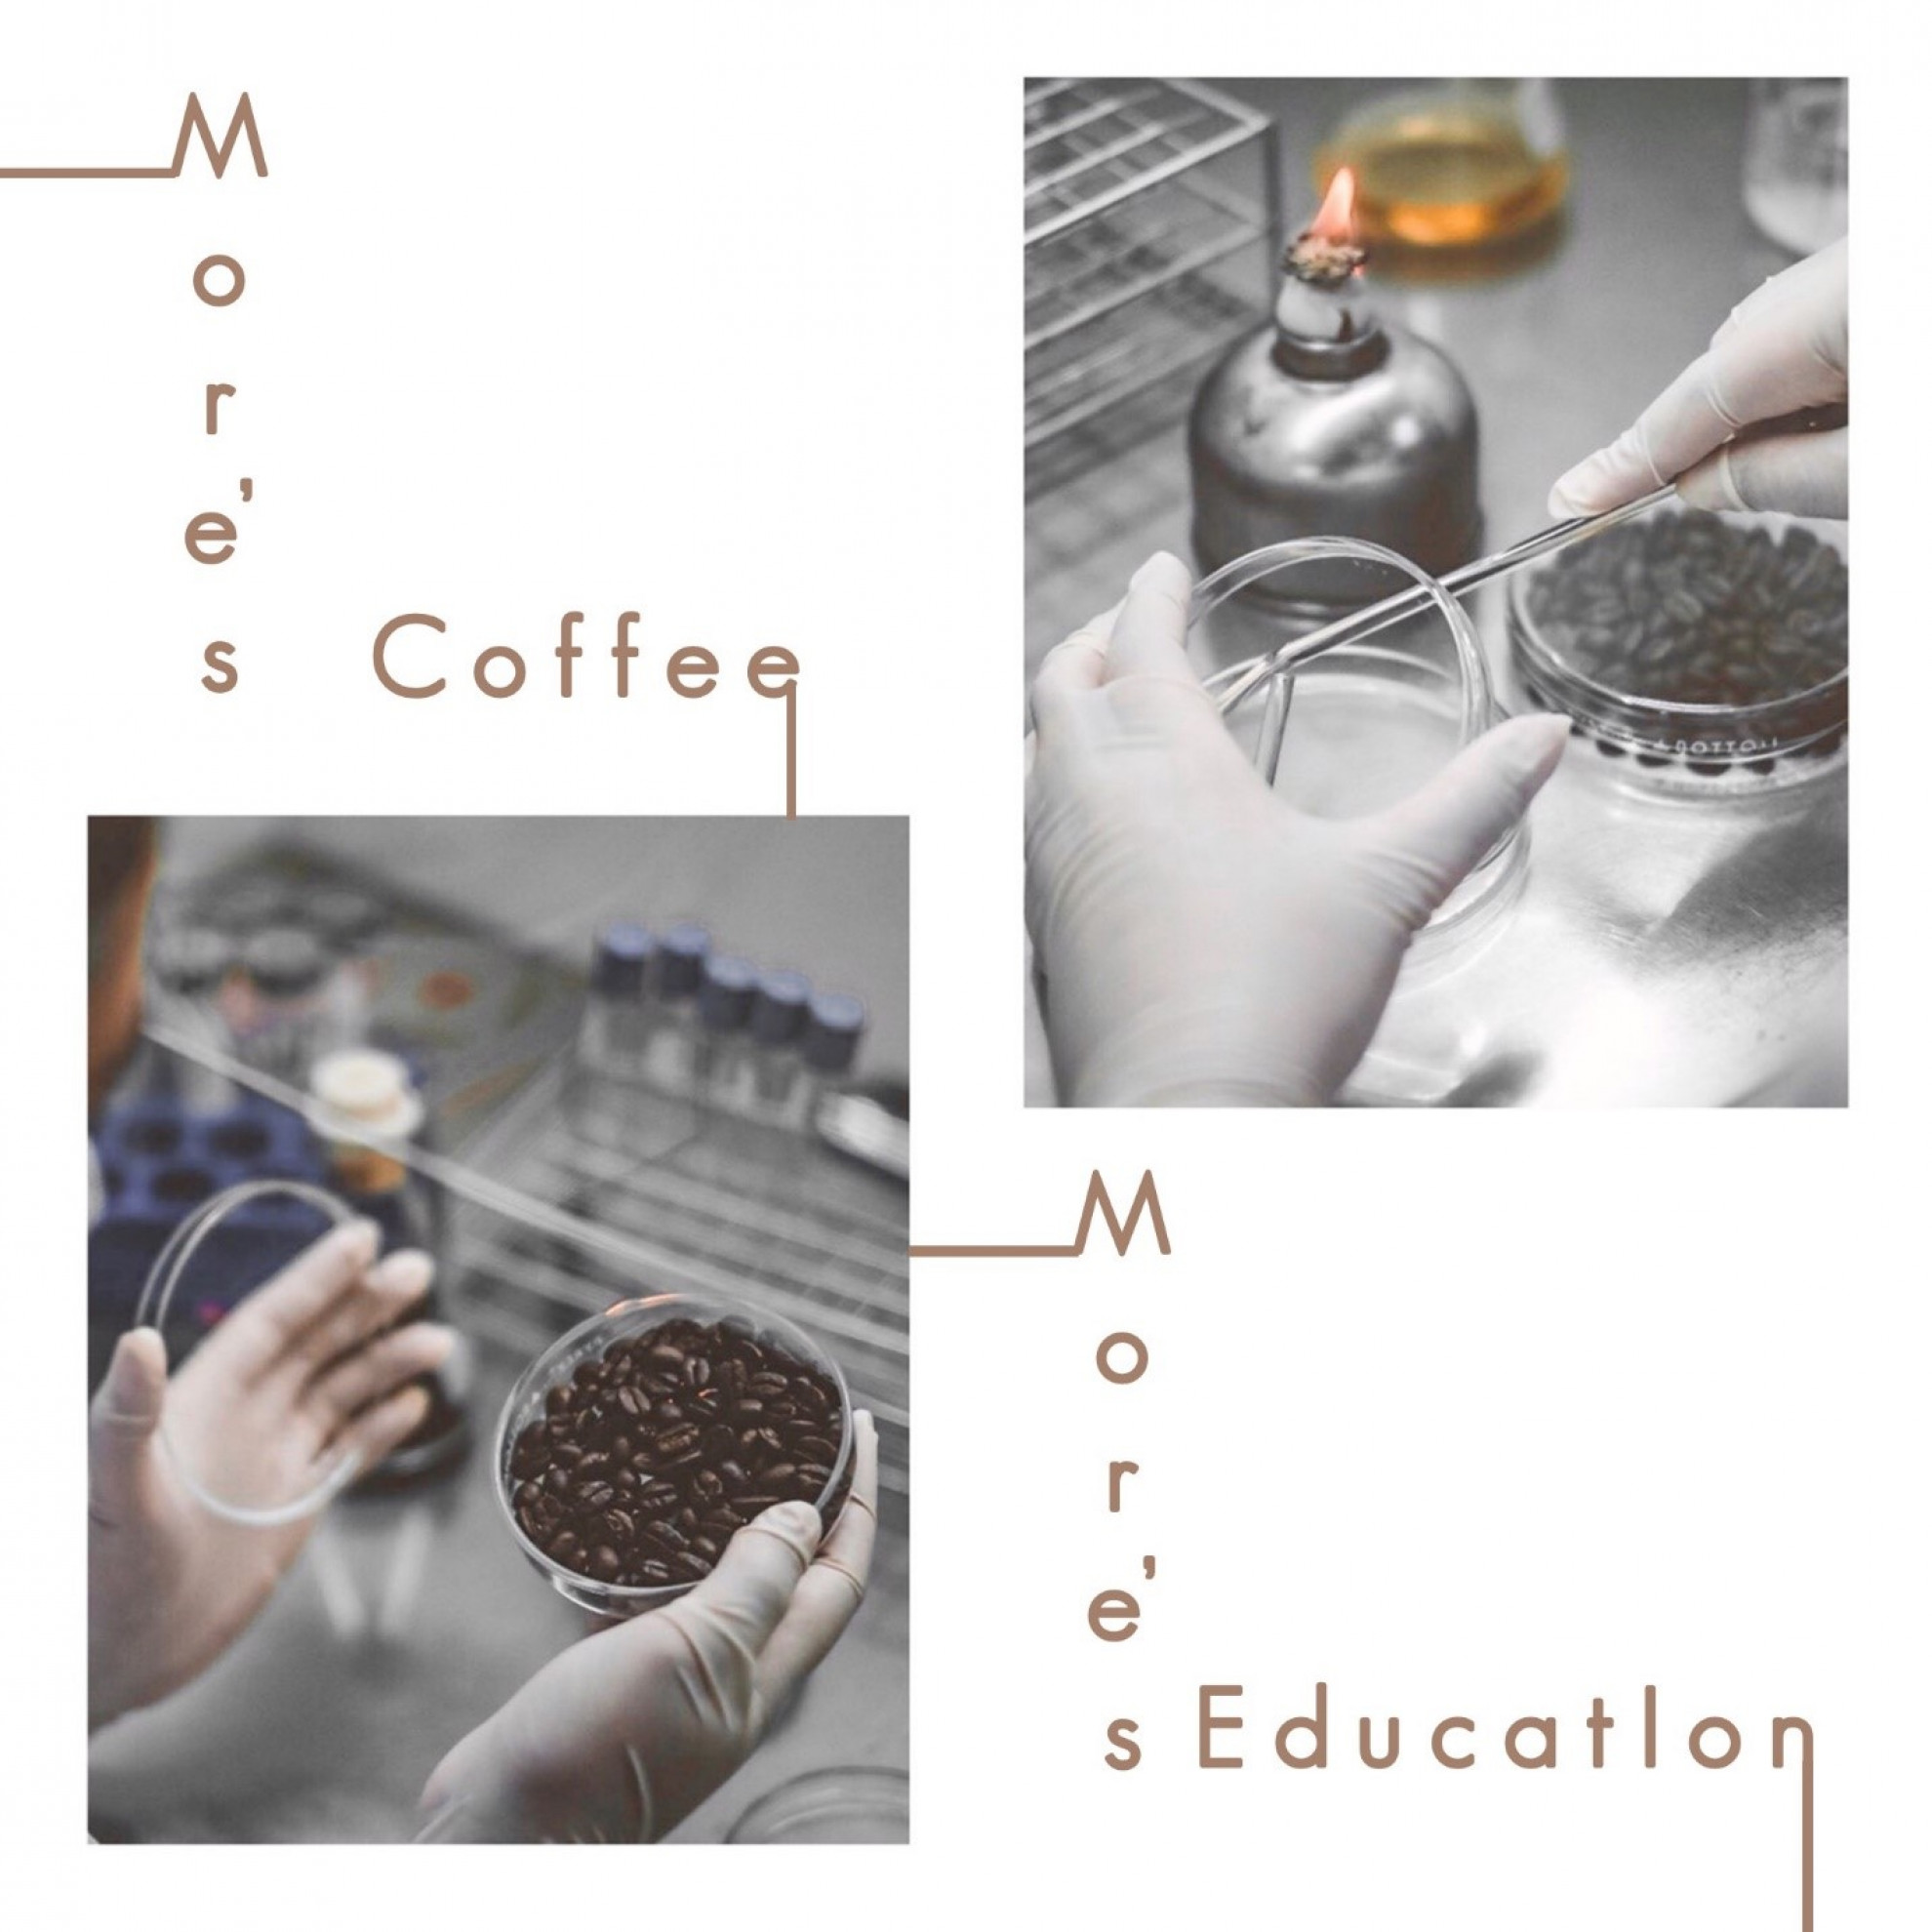 More’s coffee produced by the combination of traditional and science knowledge.